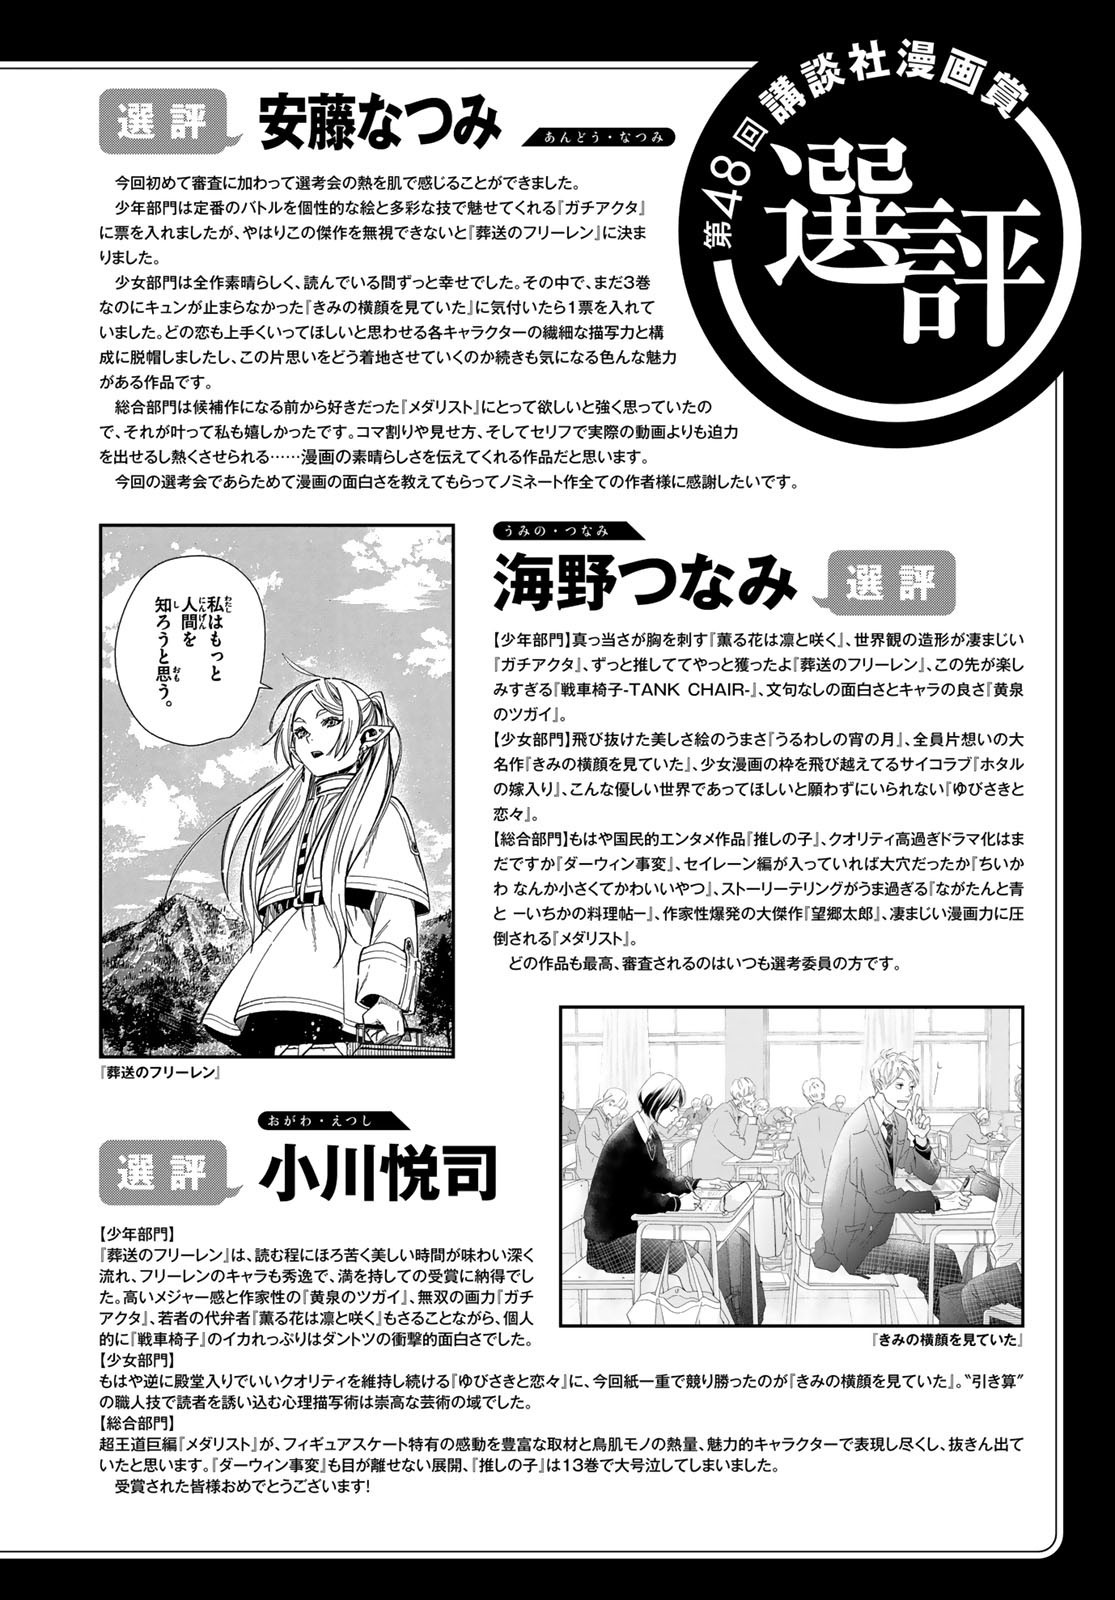 Weekly Shōnen Magazine - 週刊少年マガジン - Chapter 2024-30 - Page 443